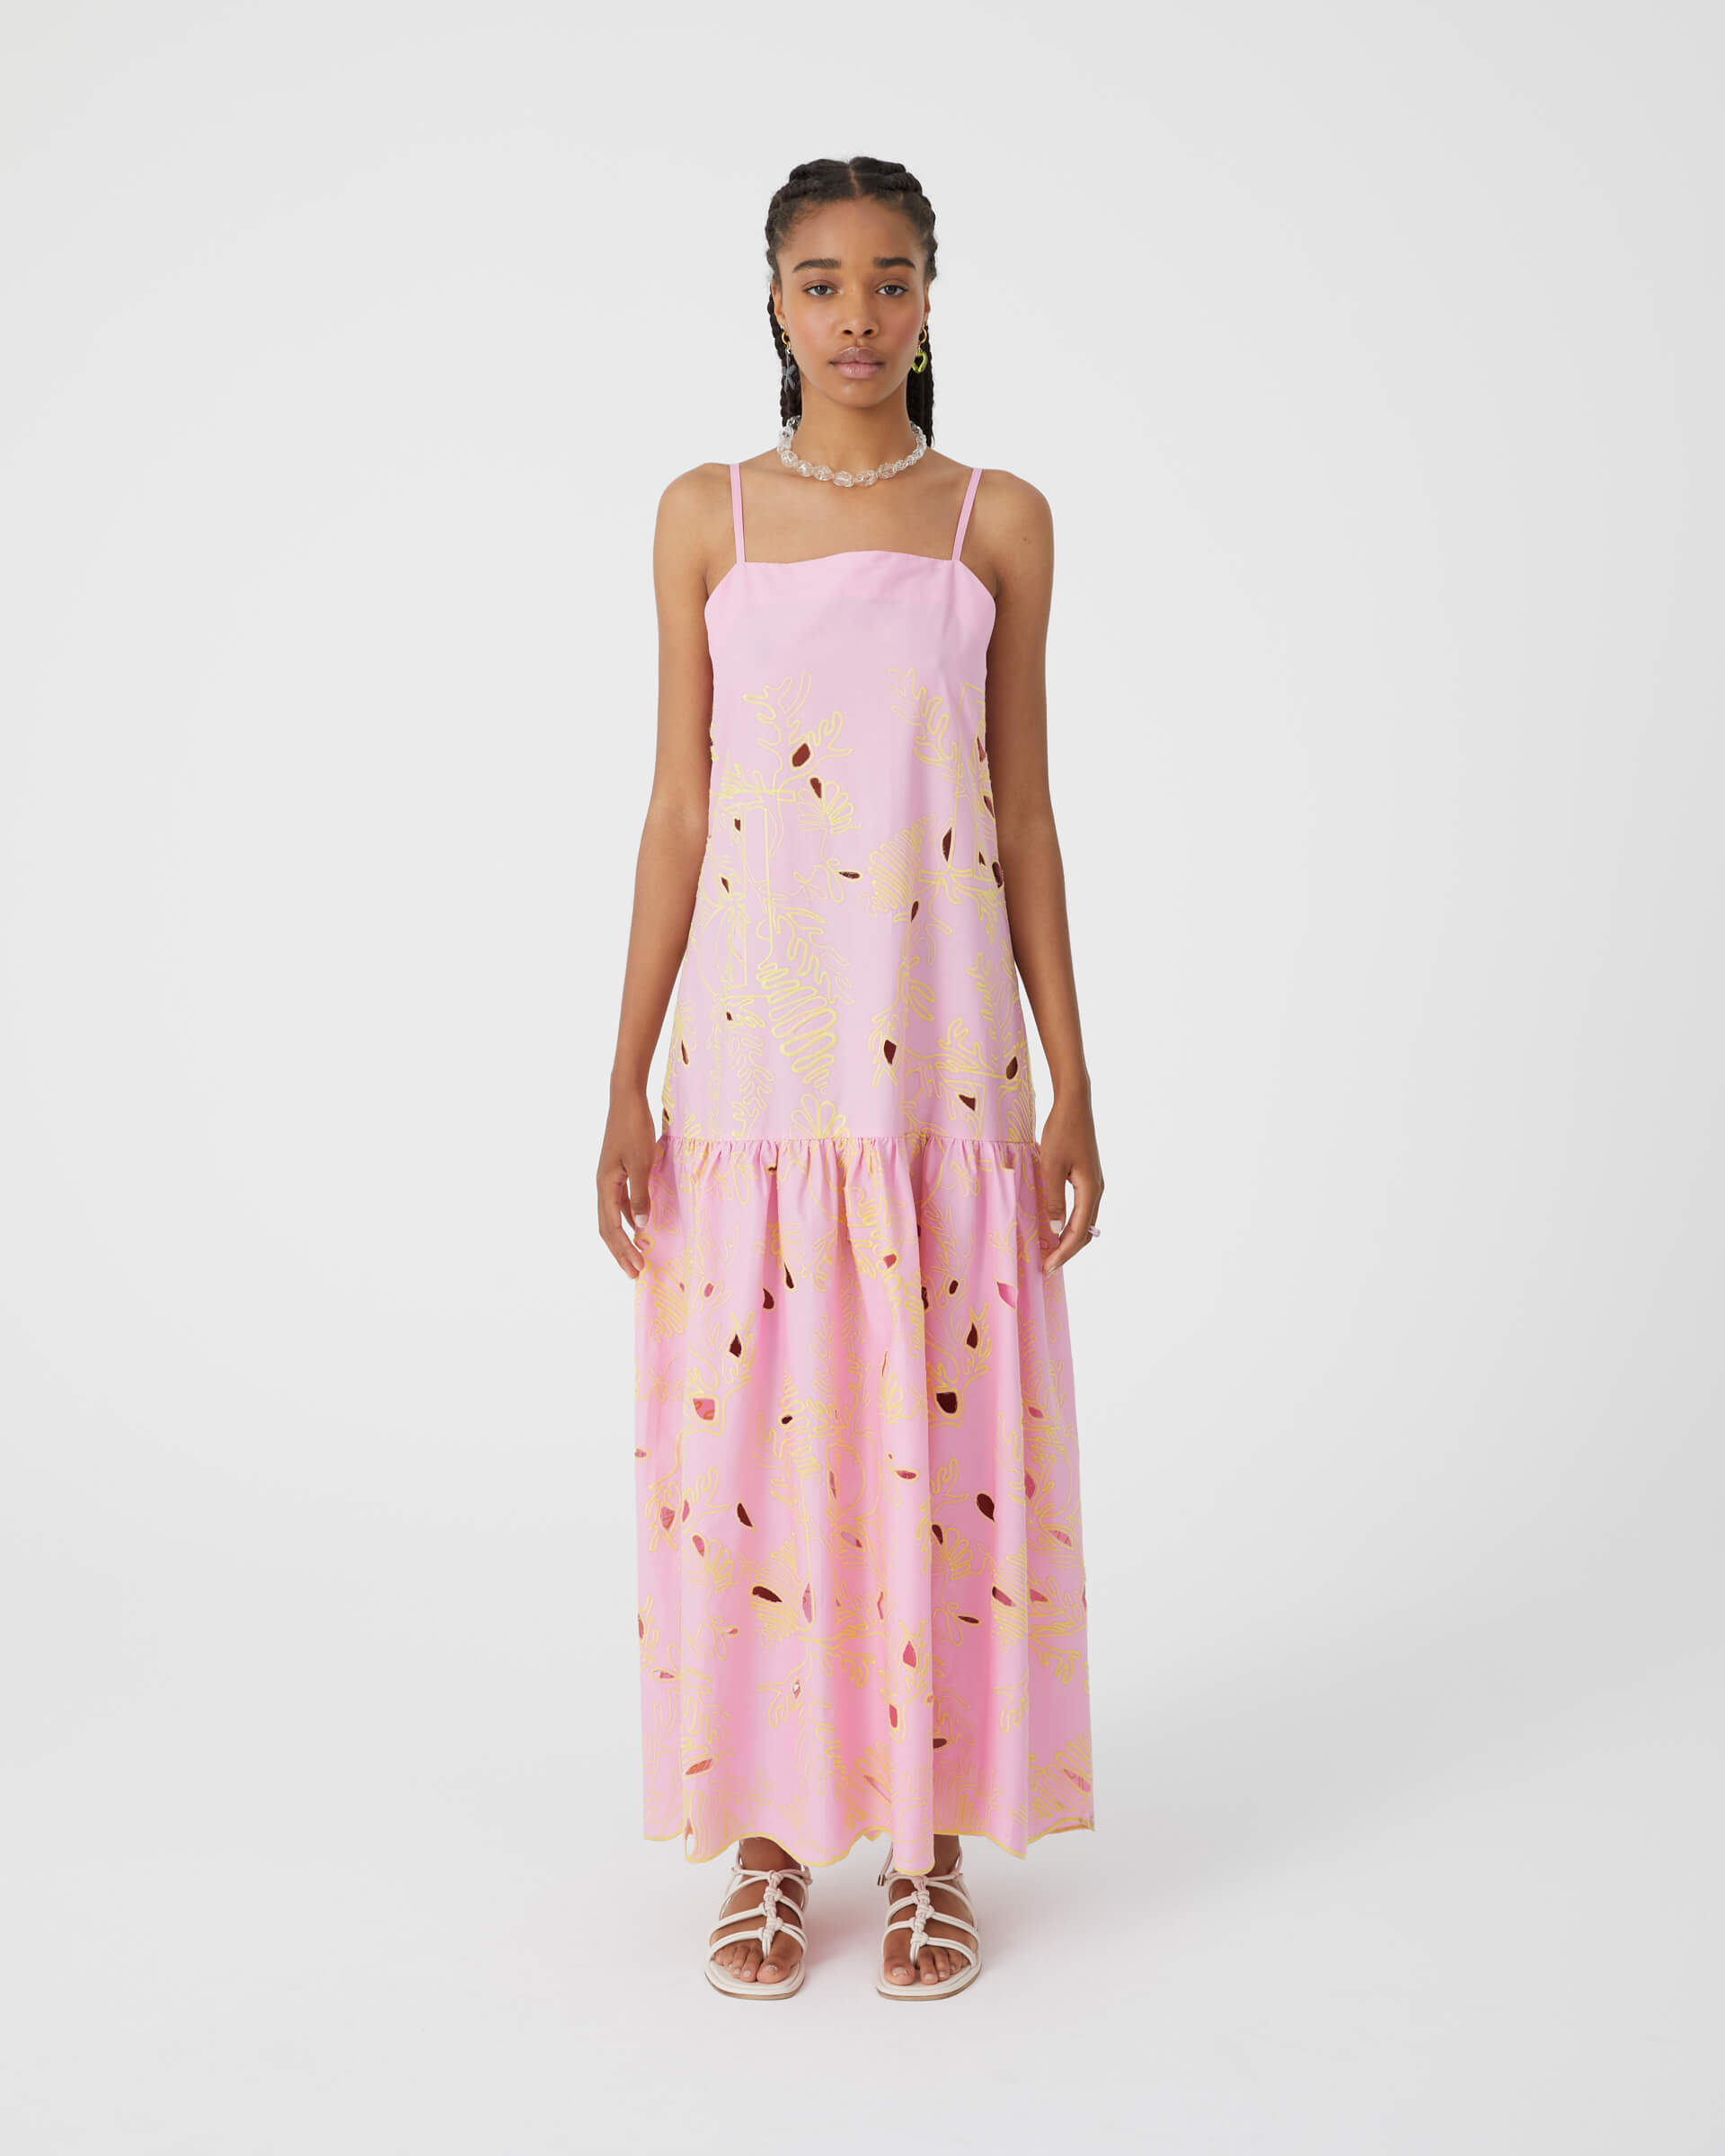 long pink dress with all over inlaid embroidery